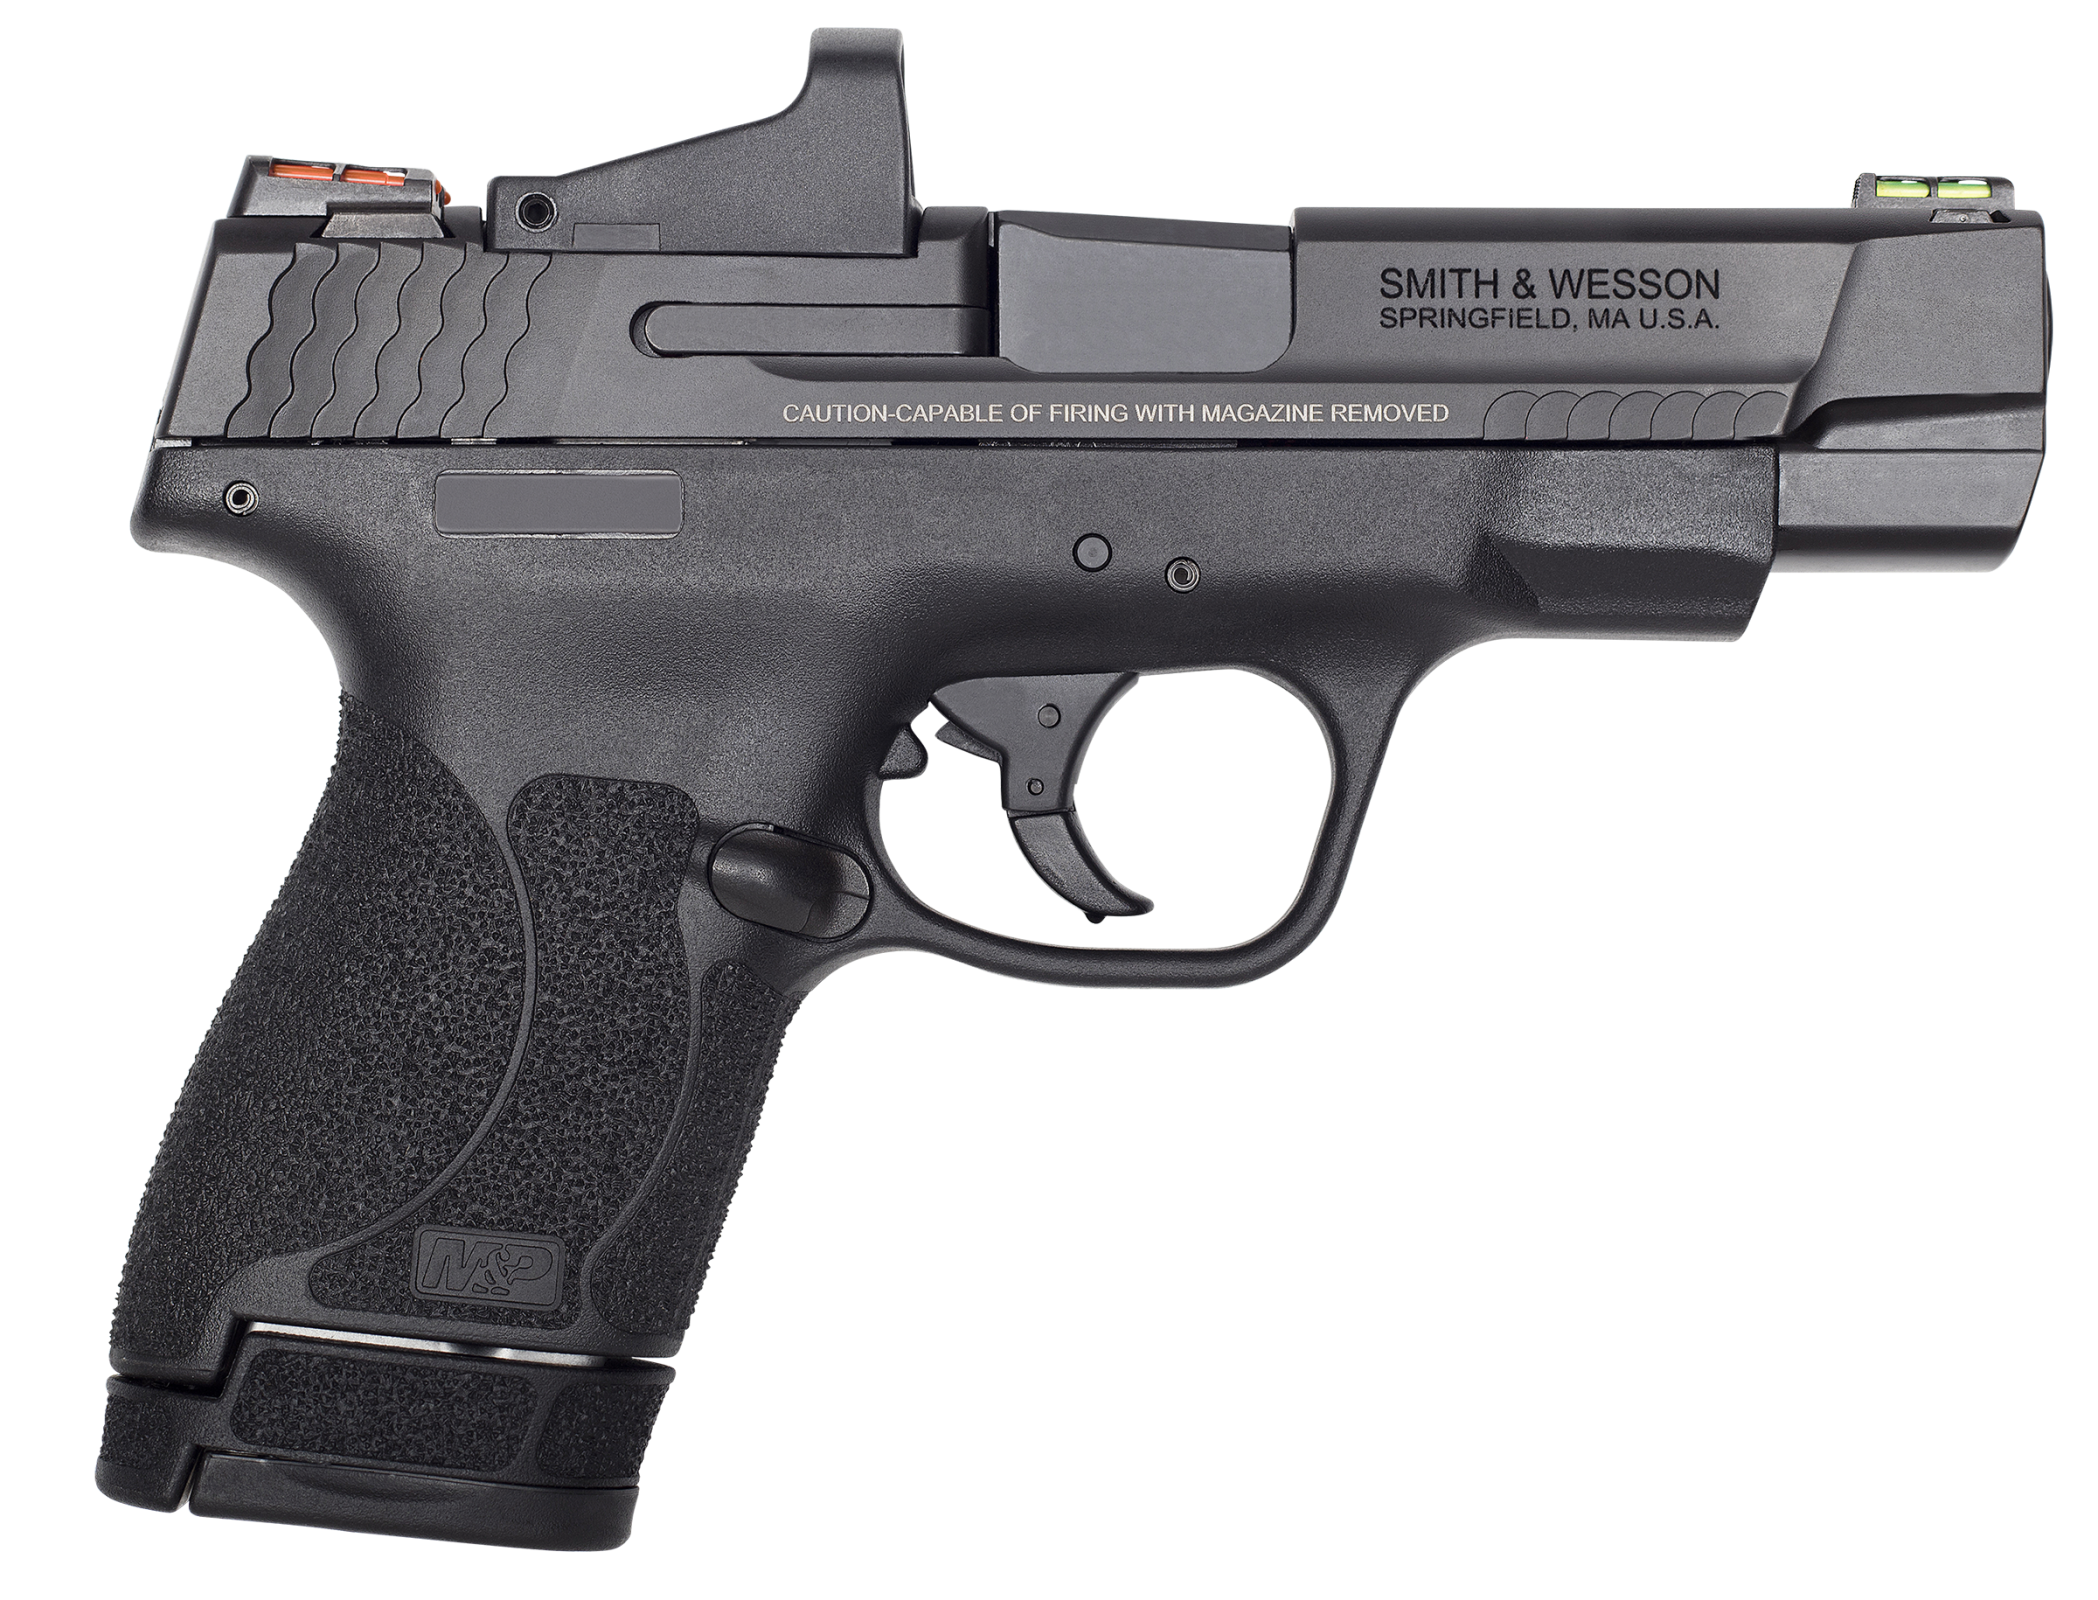 Smith &Wesson Performance Center M&ampP9 Shield M2.0 Semi-Auto Ported Pistol with Red Dot Sight